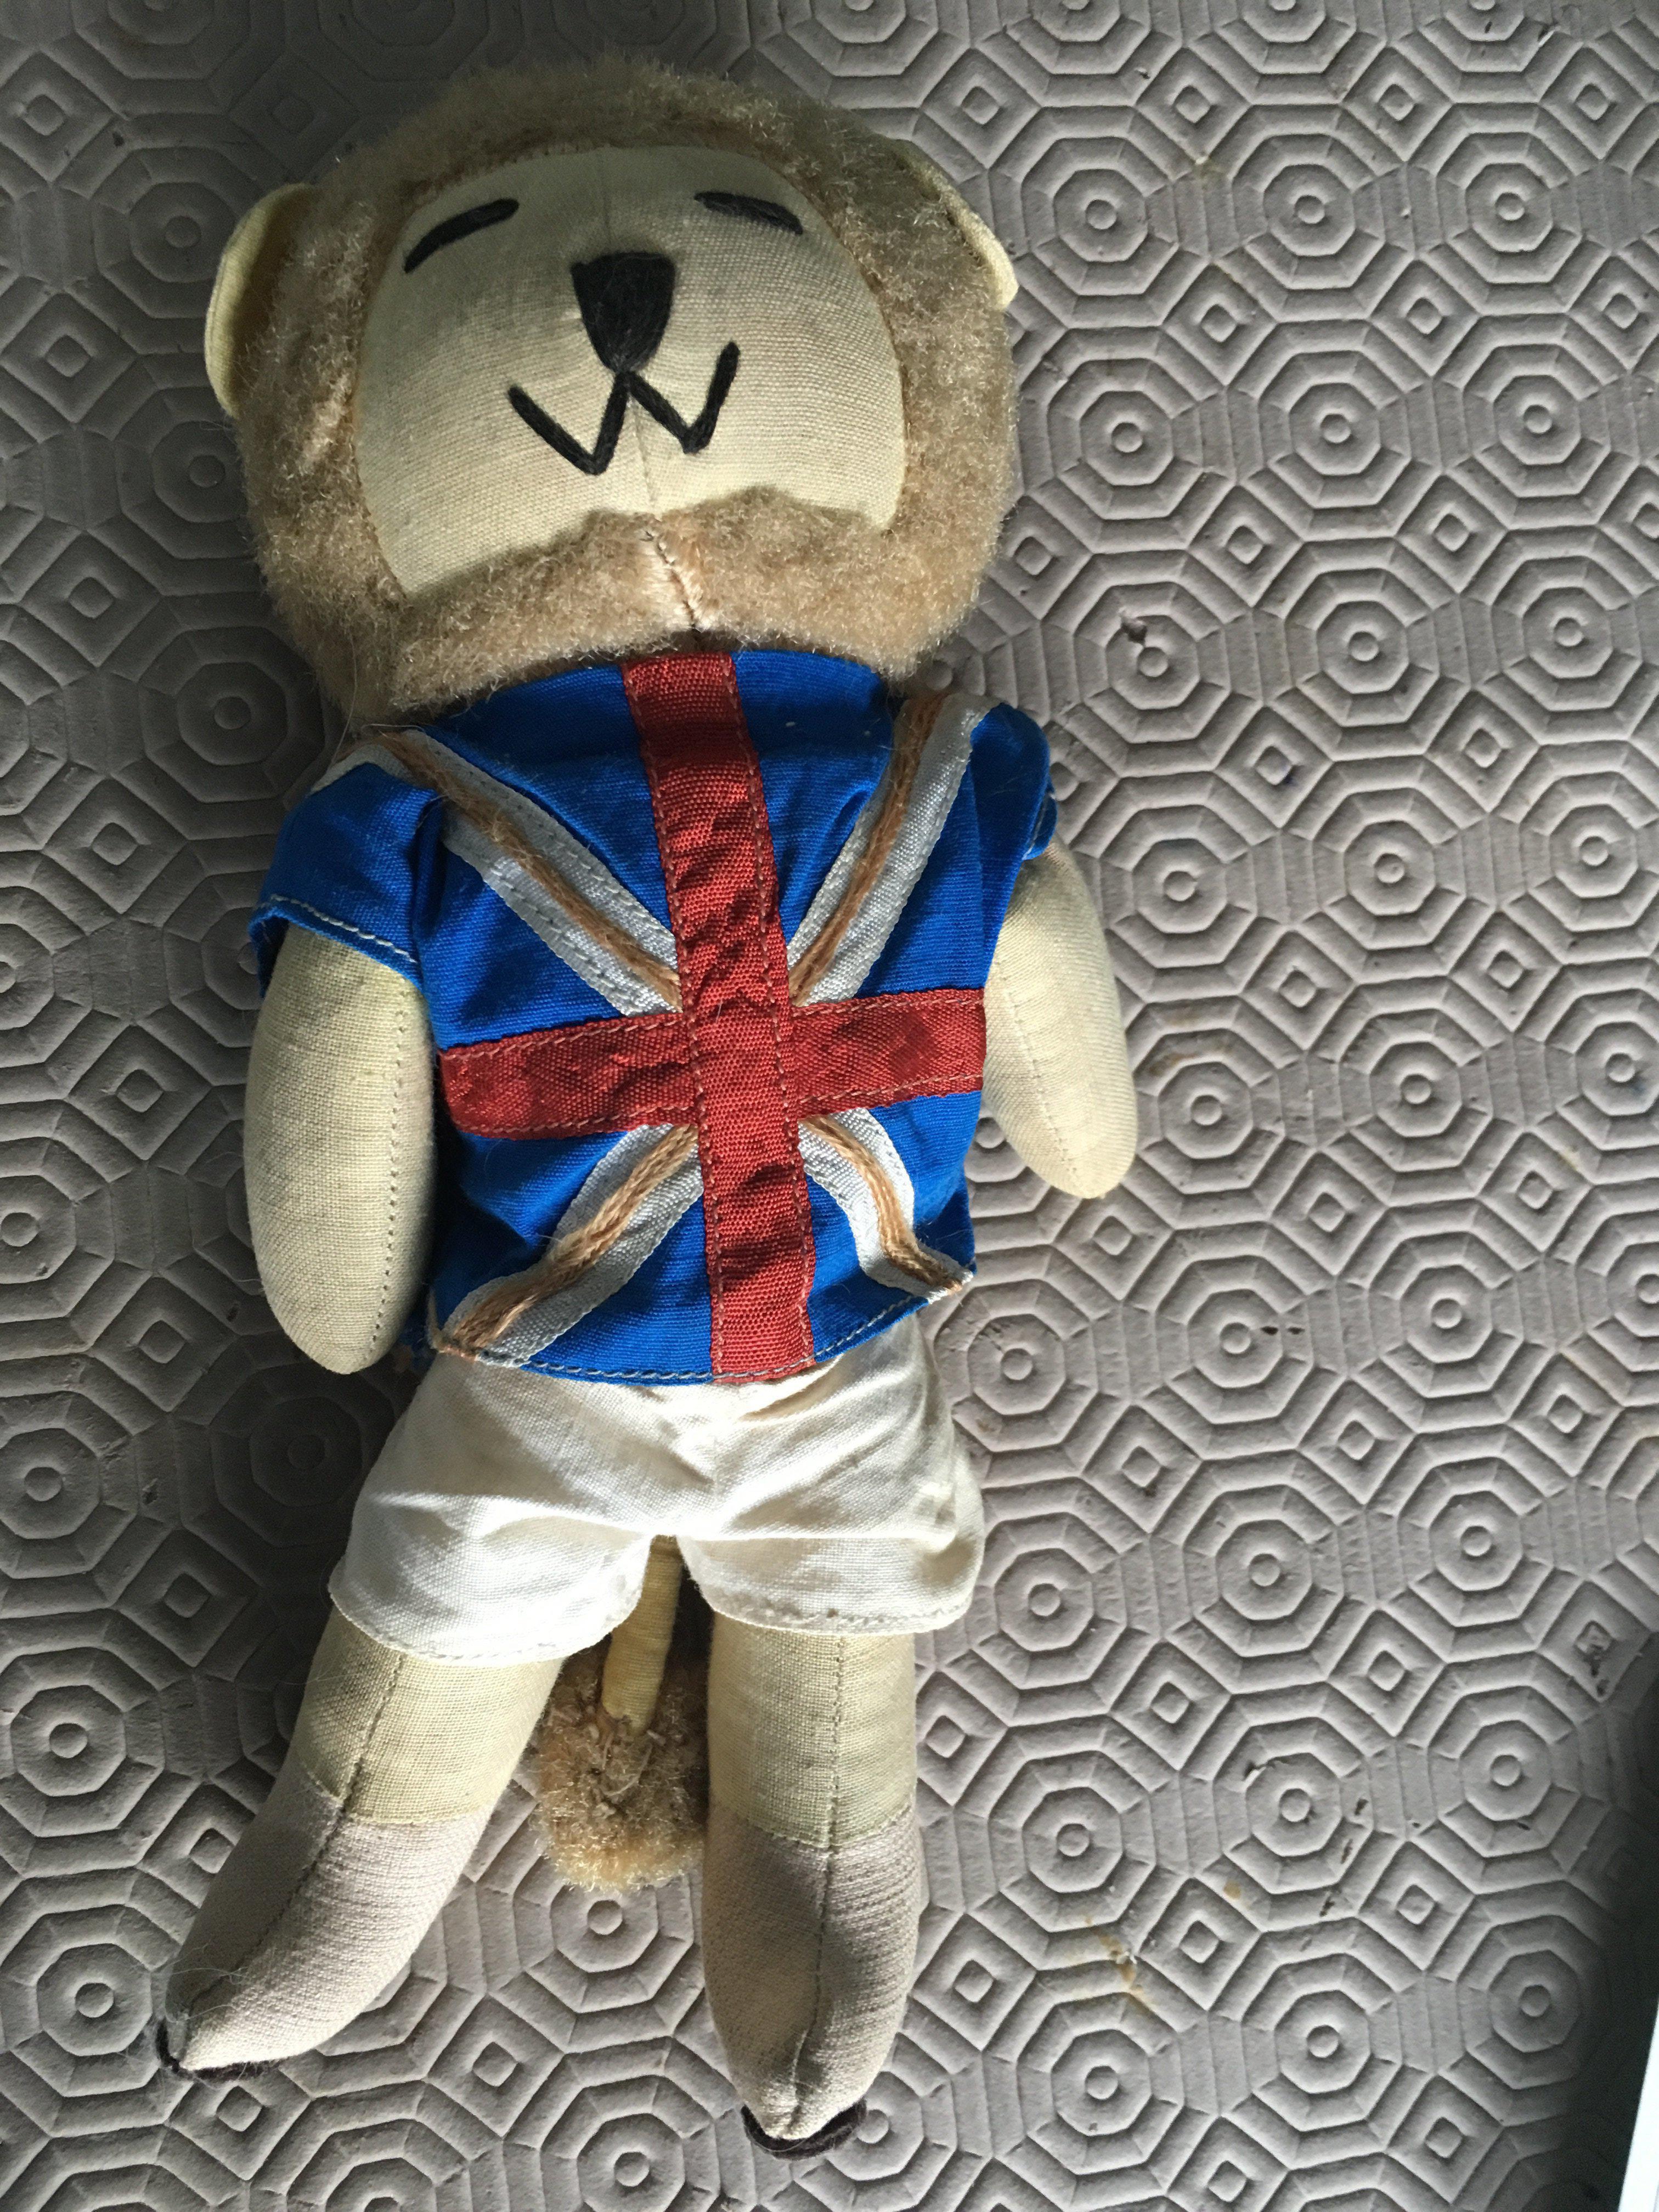 World Cup Willie Lion 1966 Football Mascot Toy: Good condition with jacket still bright and tail